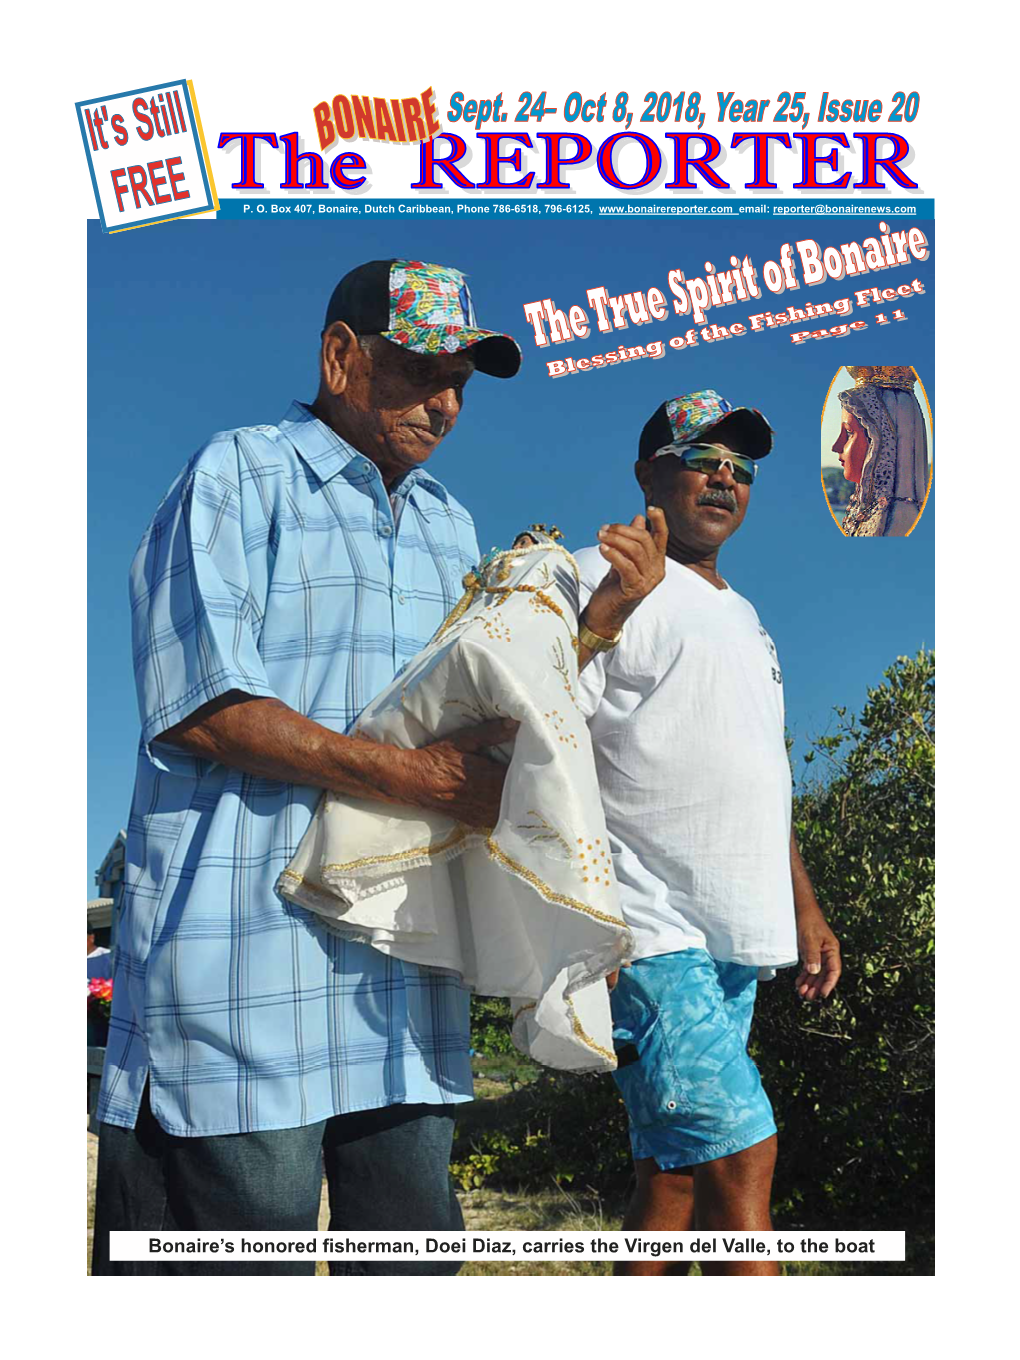 Bonaire's Honored Fisherman, Doei Diaz, Carries the Virgen Del Valle, To